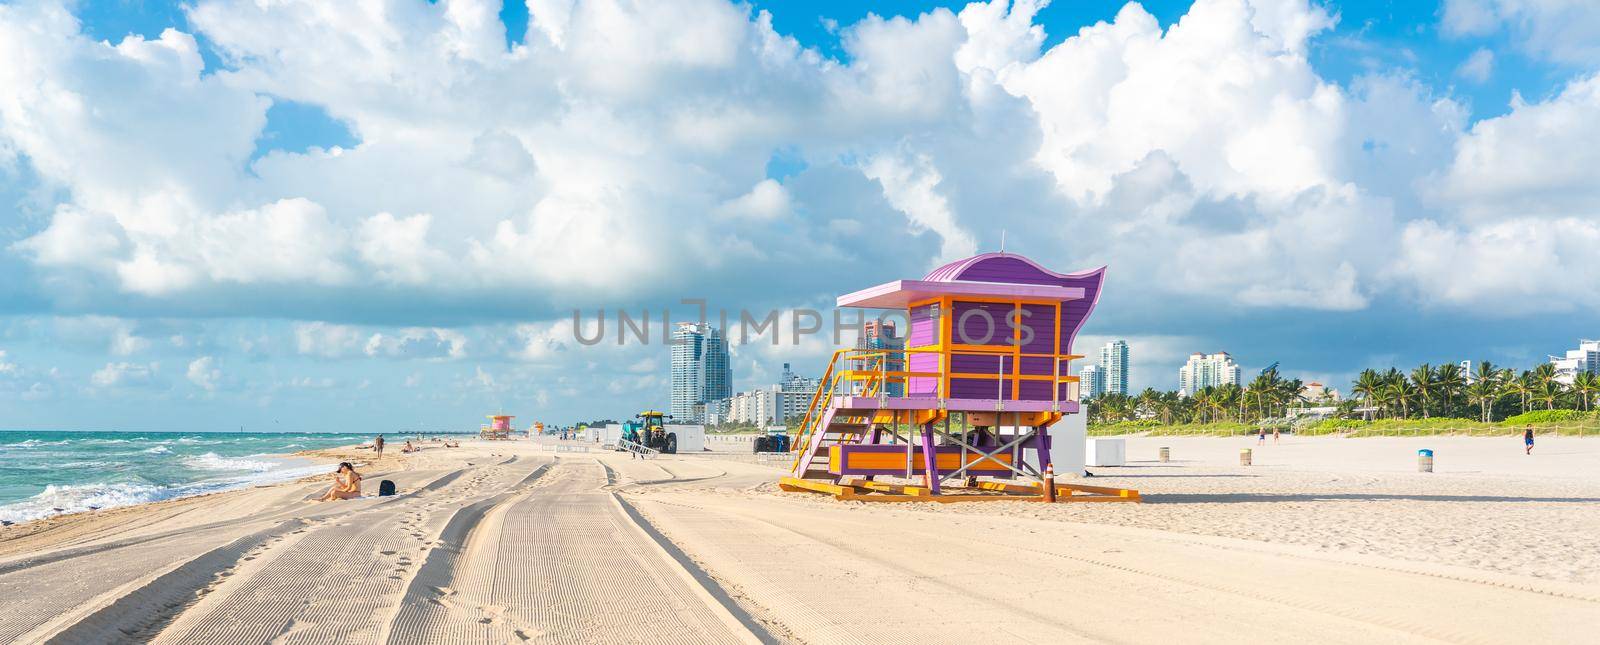 Miami - September 11, 2019: South beach in Miami with lifeguard hut in Art deco style by Mariakray